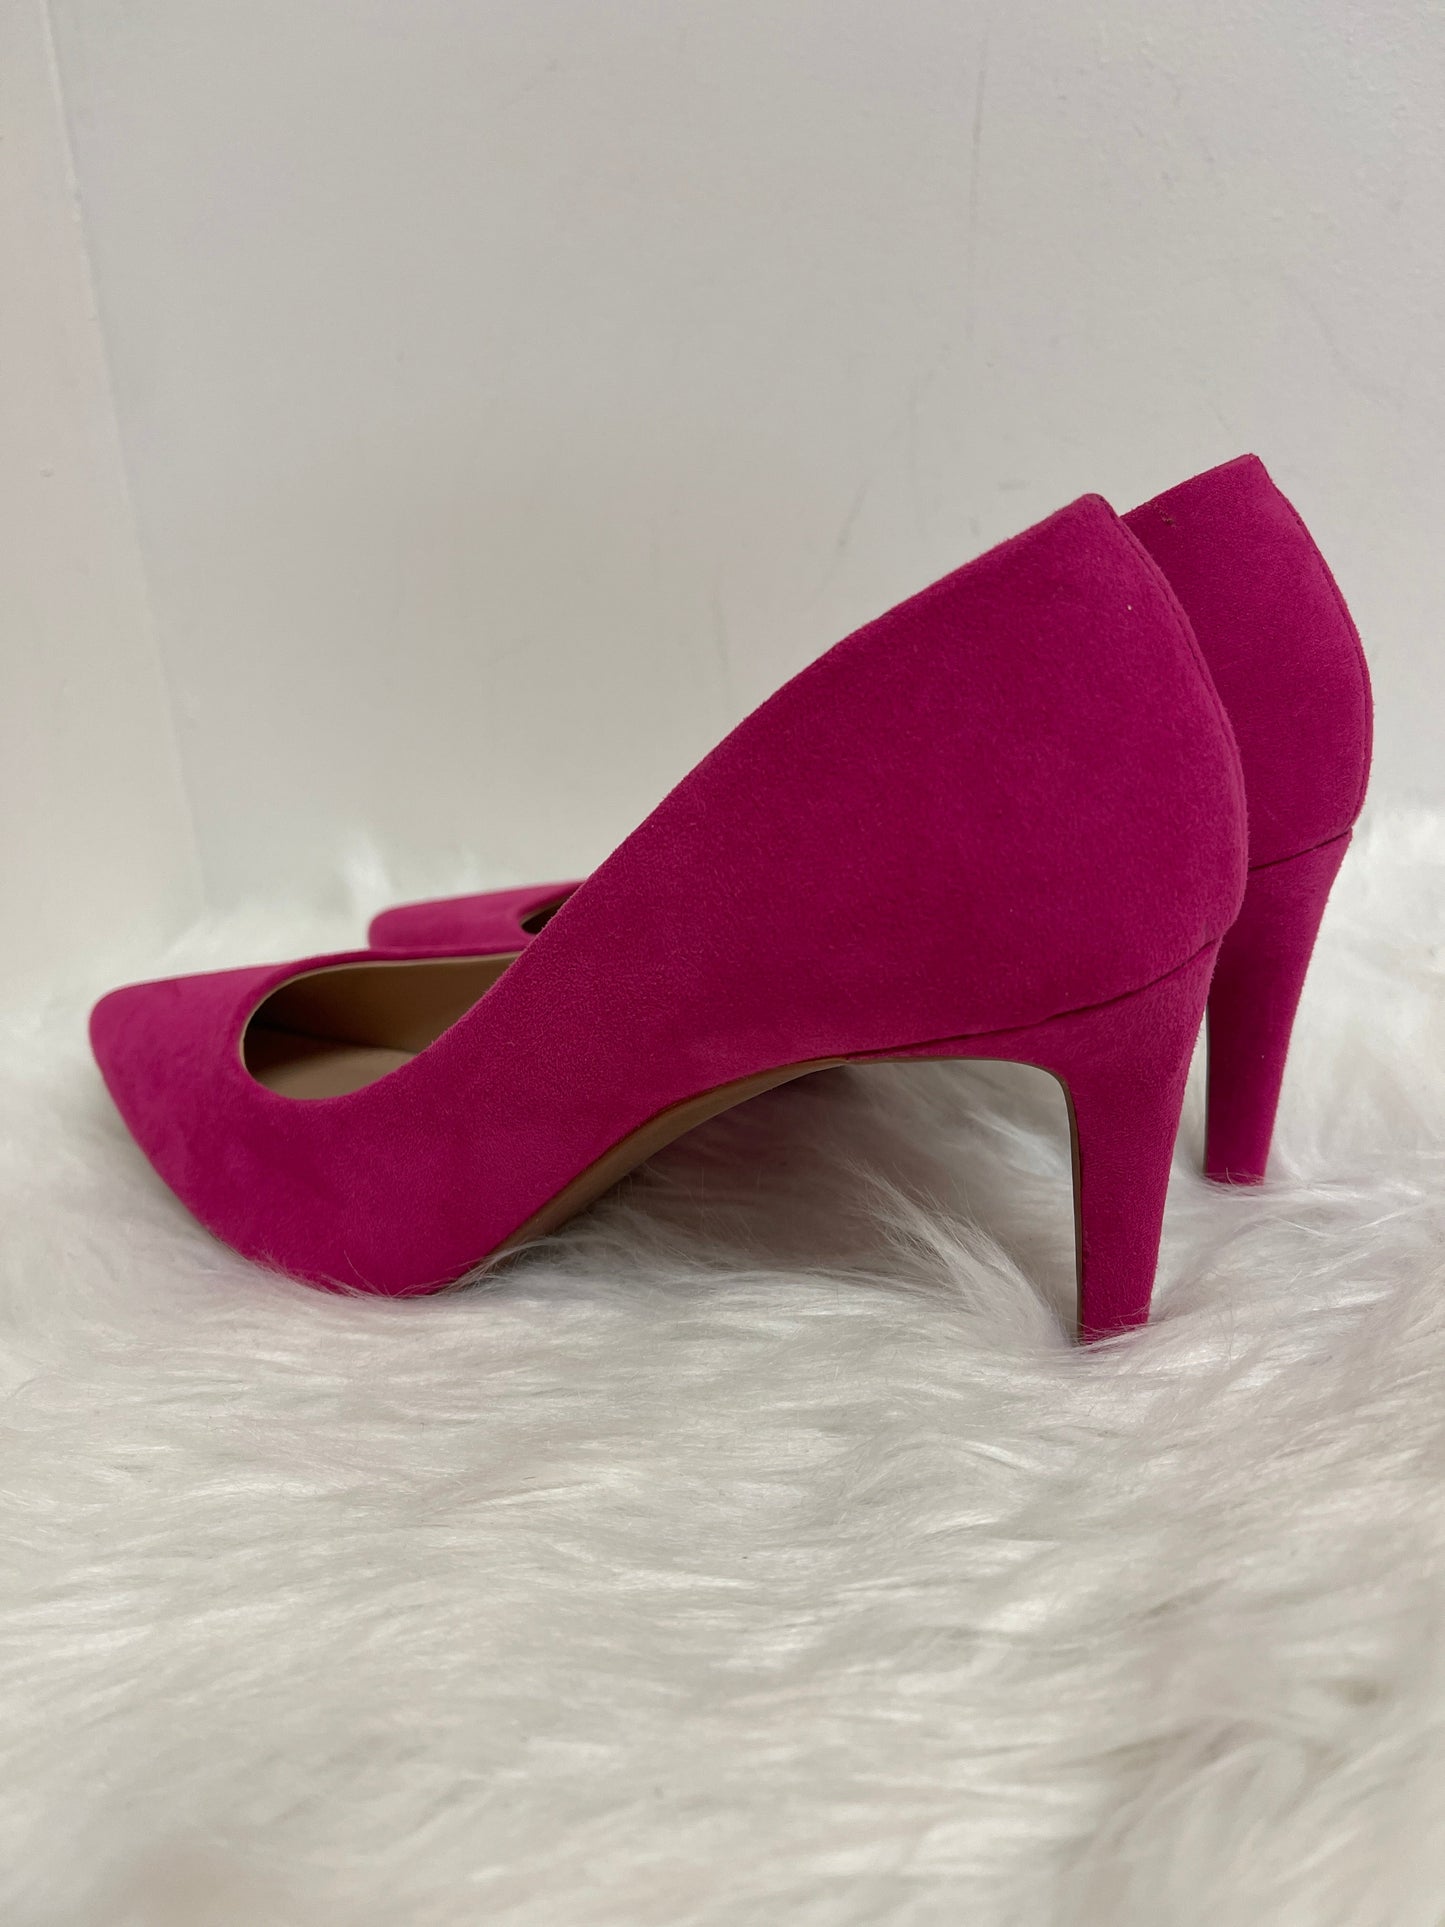 Pink Shoes Heels Stiletto Kelly And Katie, Size 8.5